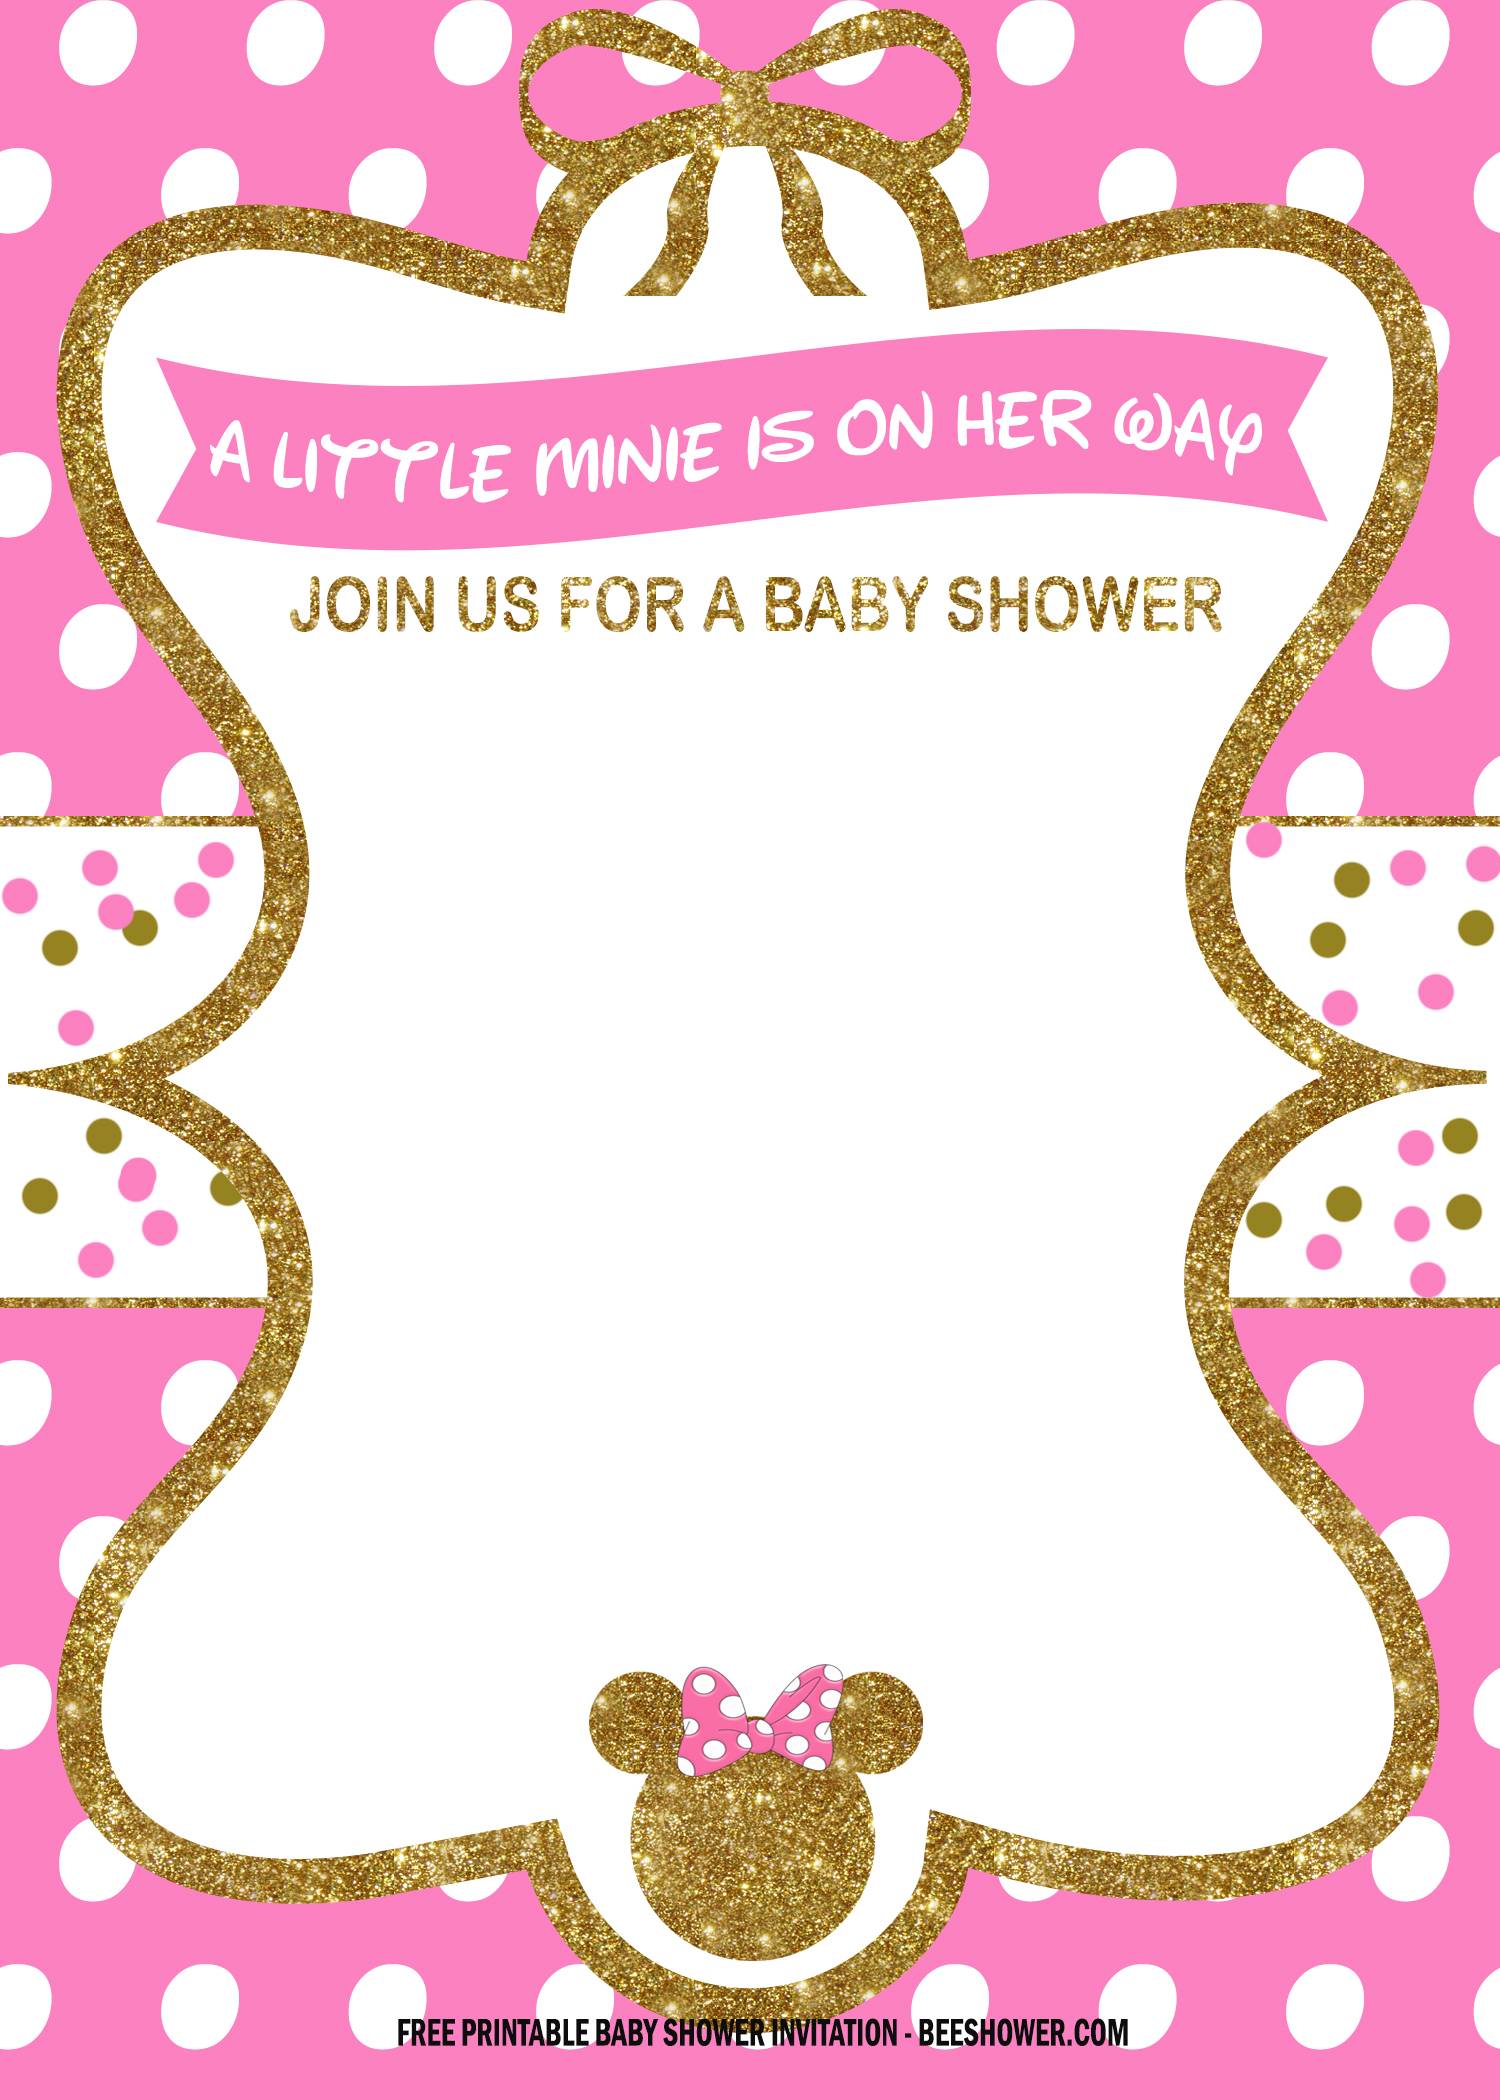 Free Printable Minnie Mouse Invitation Template from www.drevio.com